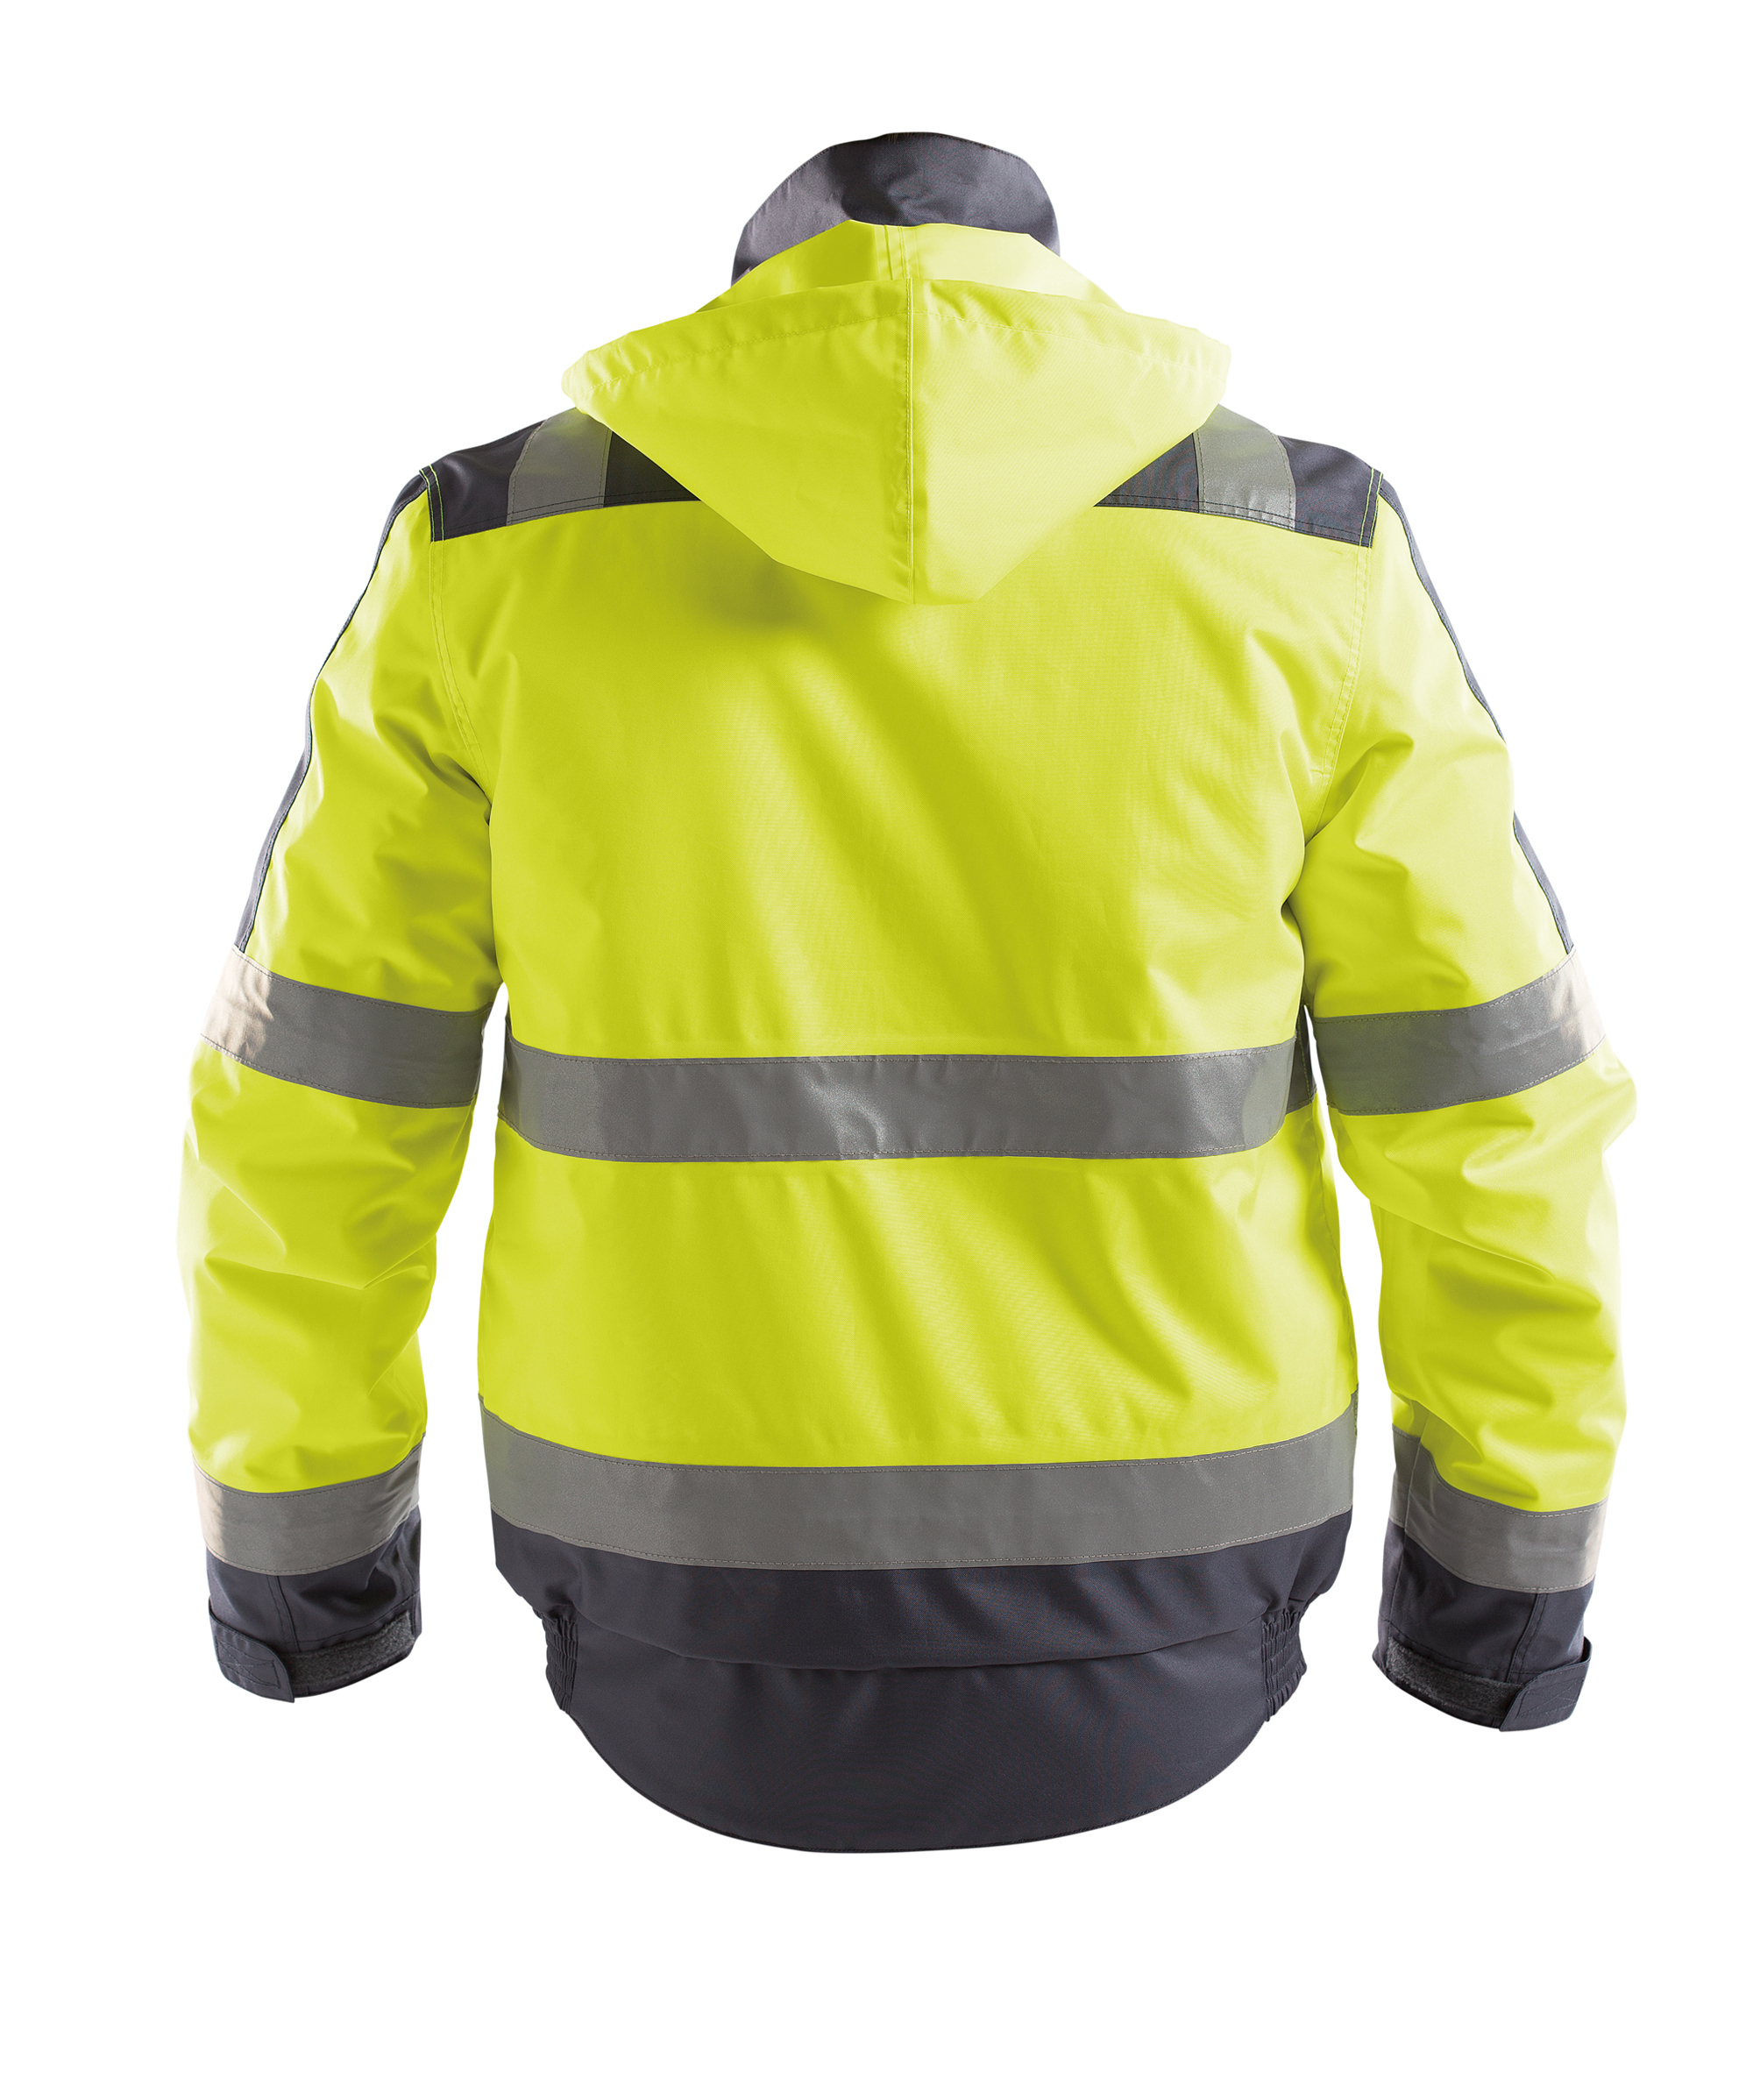 lima_high-visibility-winter-jacket_fluo-yellow-cement-grey_back.jpg